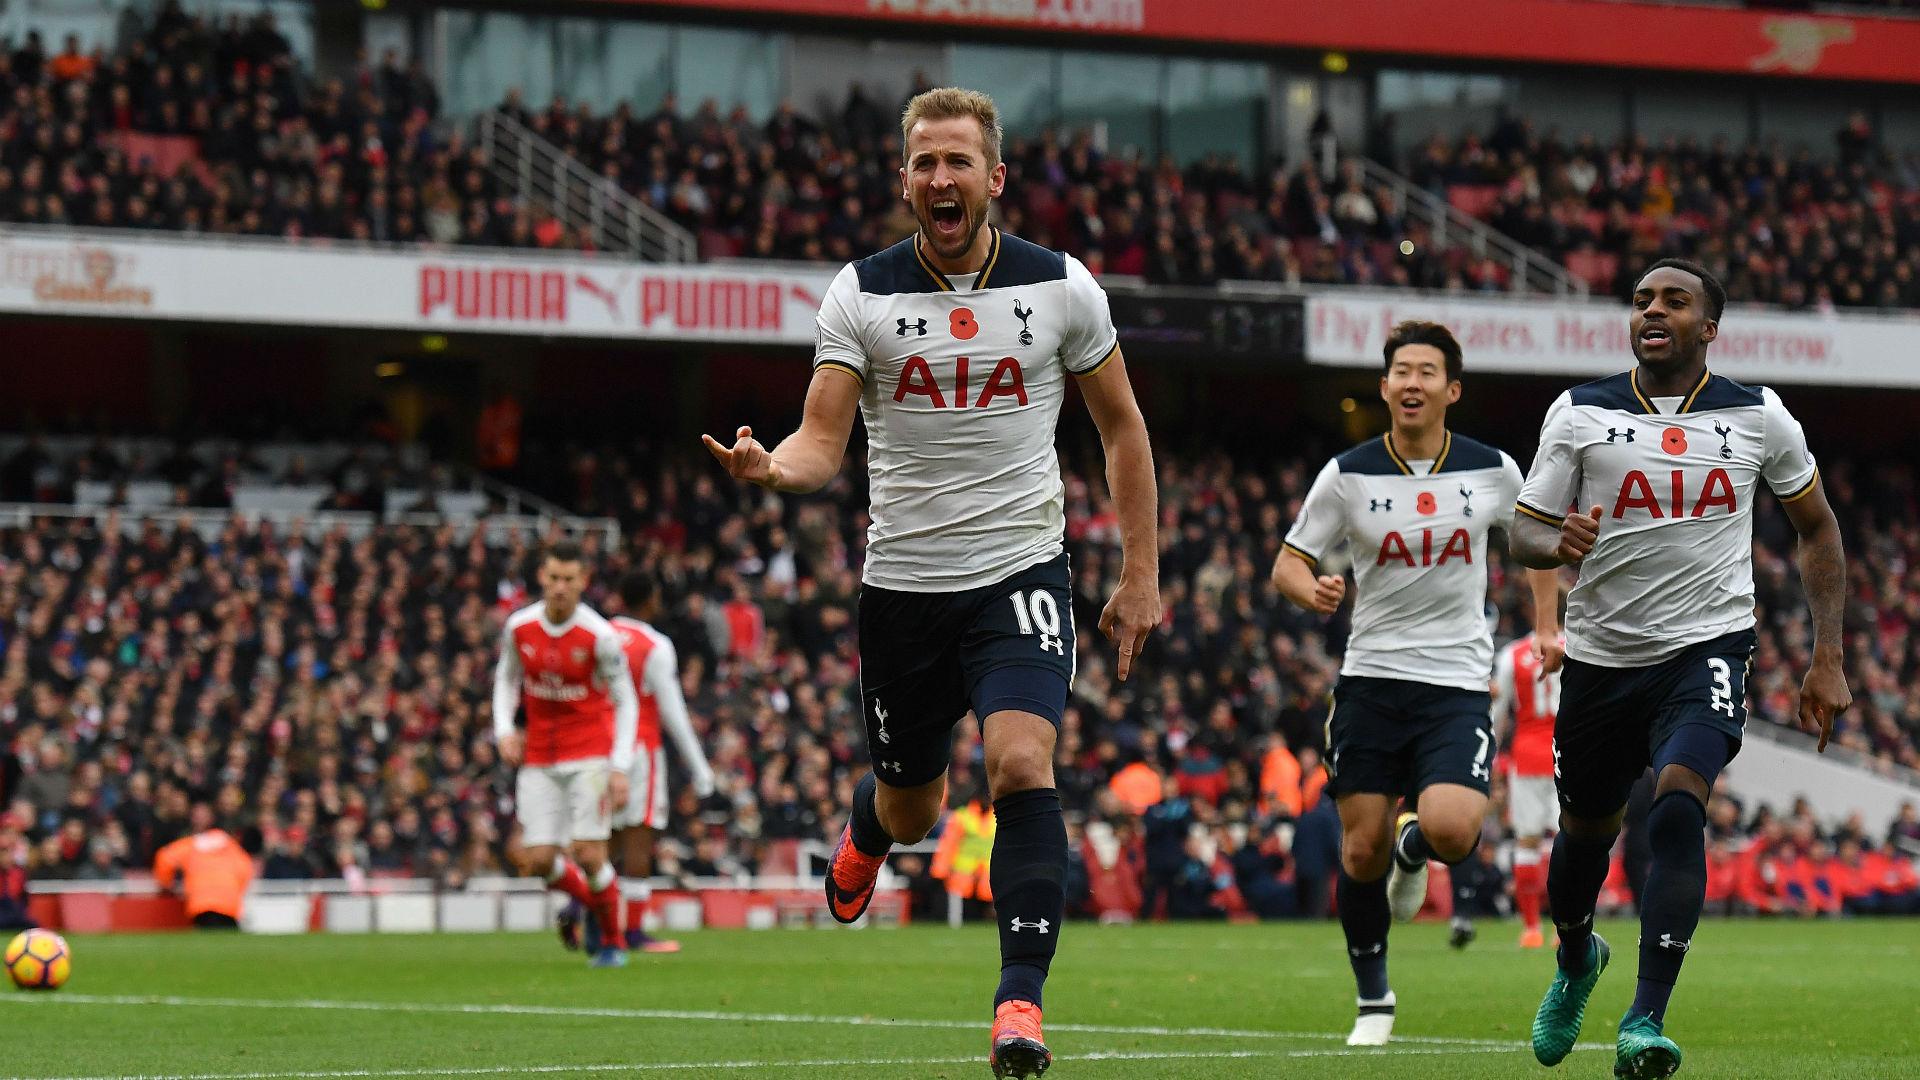 North London derby: The story of Harry Kane's Arsenal background